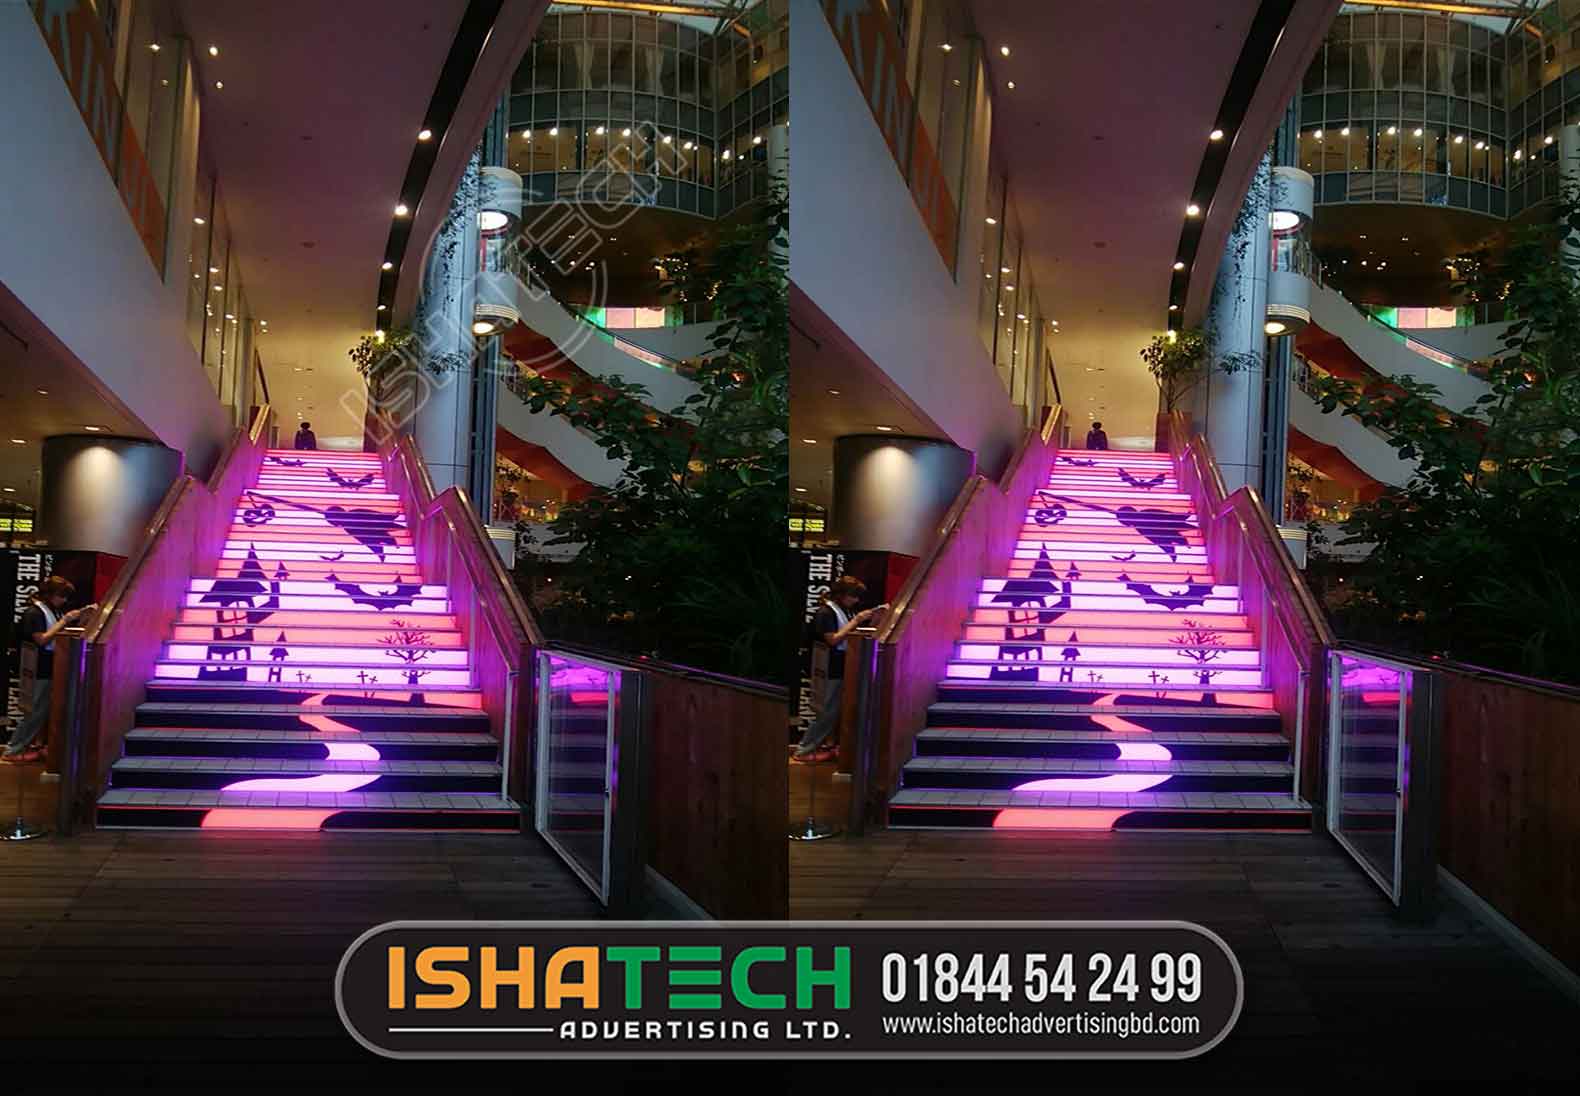 Indoor SMD Full Color Creative LED Display Steps Stairs LED Screen, Unbreakable Sheet Water Proof Pixel Led More Than 100 Graphics Per Panel Pixel Led's - 216 Total Pixel Led's - 1296 Supply Box With Controller Supply Ratings - 5 Volts, 60 Amperes Pixel Led Controller – T1000 XLR To XLR Connectors . Easy To Install. Fix With Any Panel Anywhere